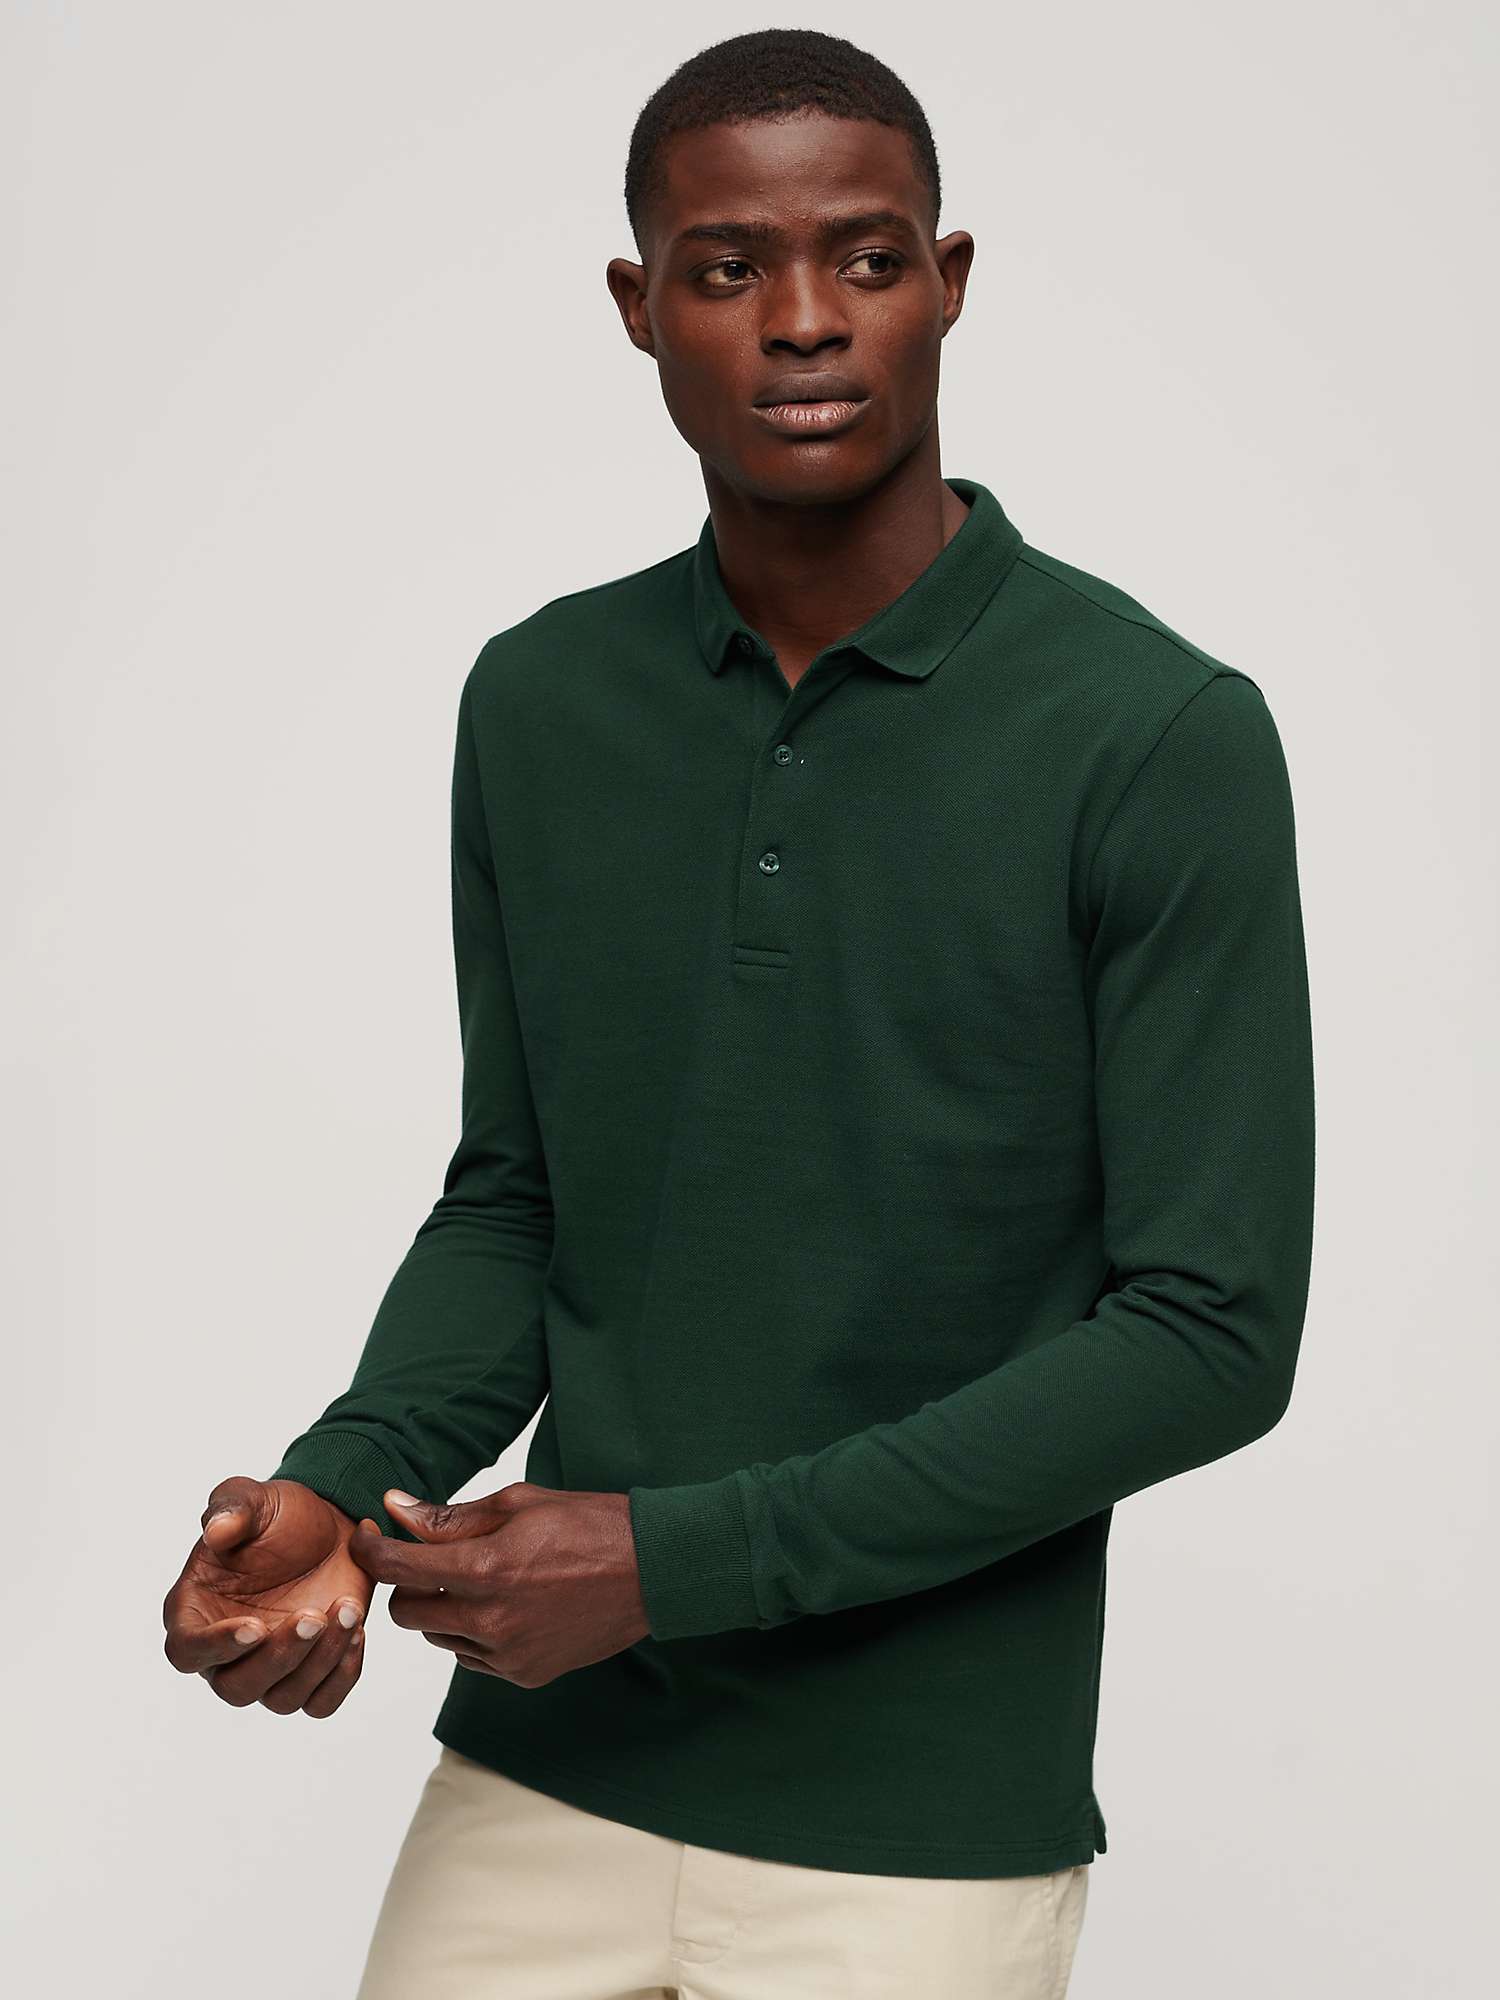 Buy Superdry Long Sleeve Cotton Pique Polo Shirt Online at johnlewis.com